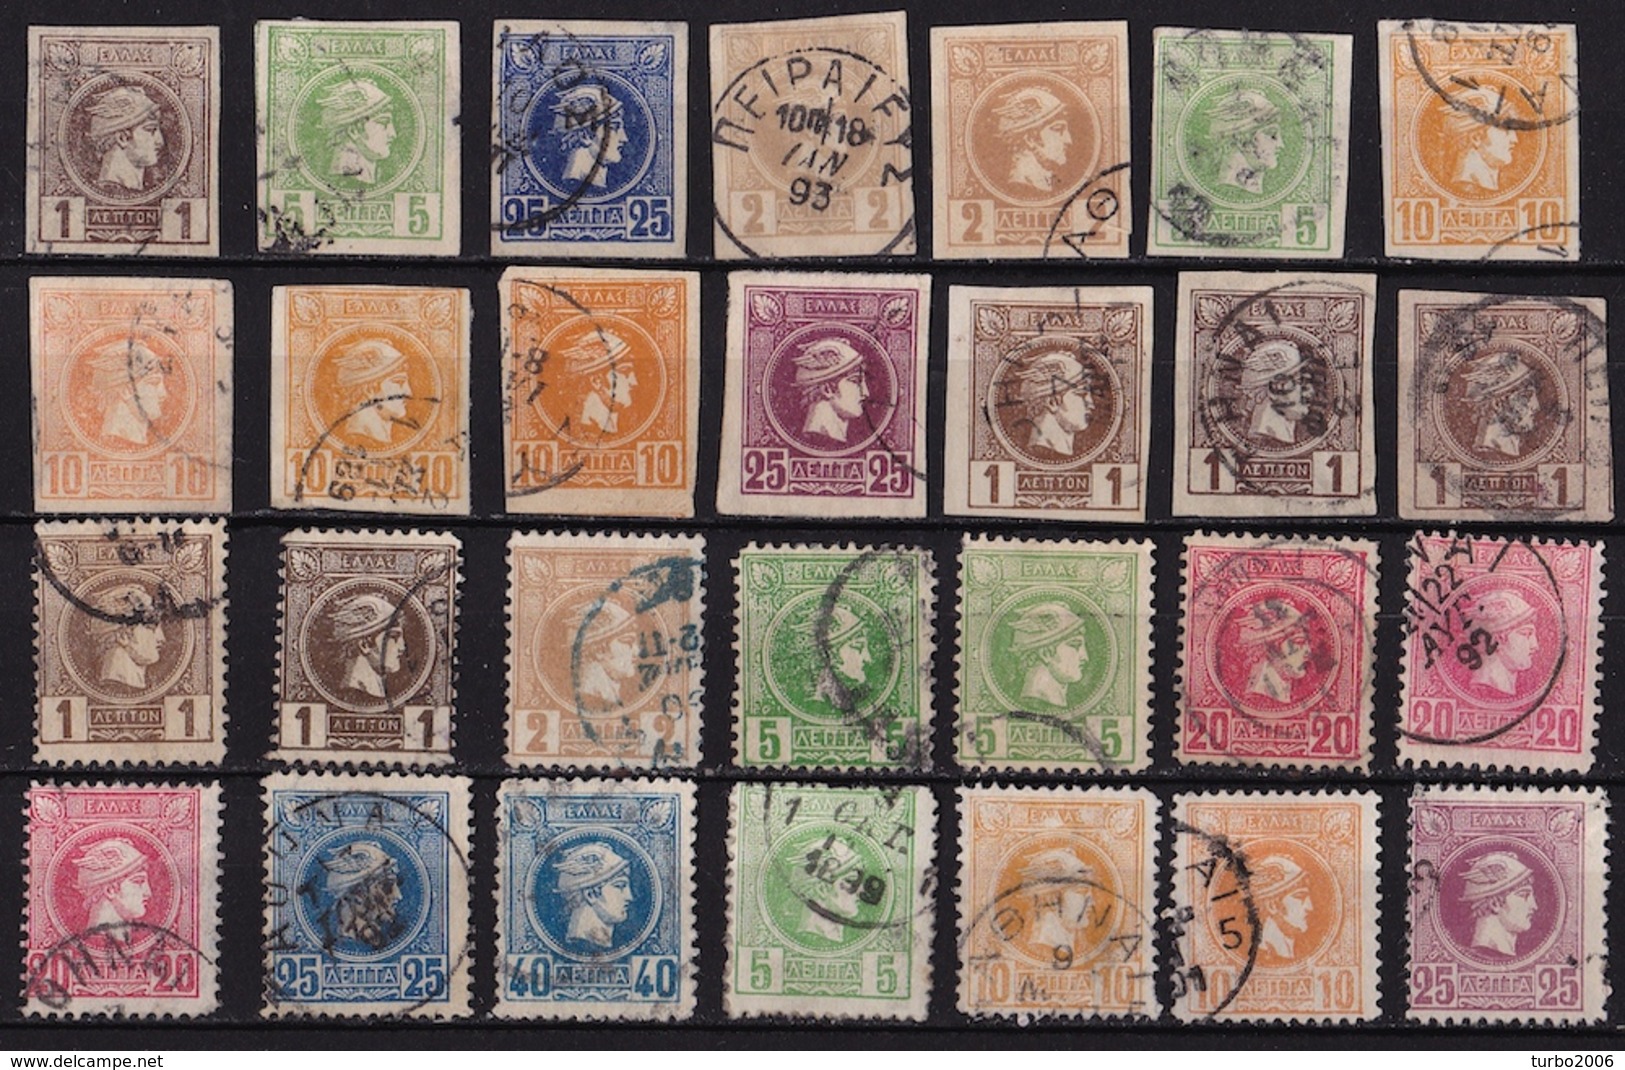 GREECE 1886-1890 Small Hermes Head 28 Im- / Perforated Stamps As Shown On Scan - Gebruikt